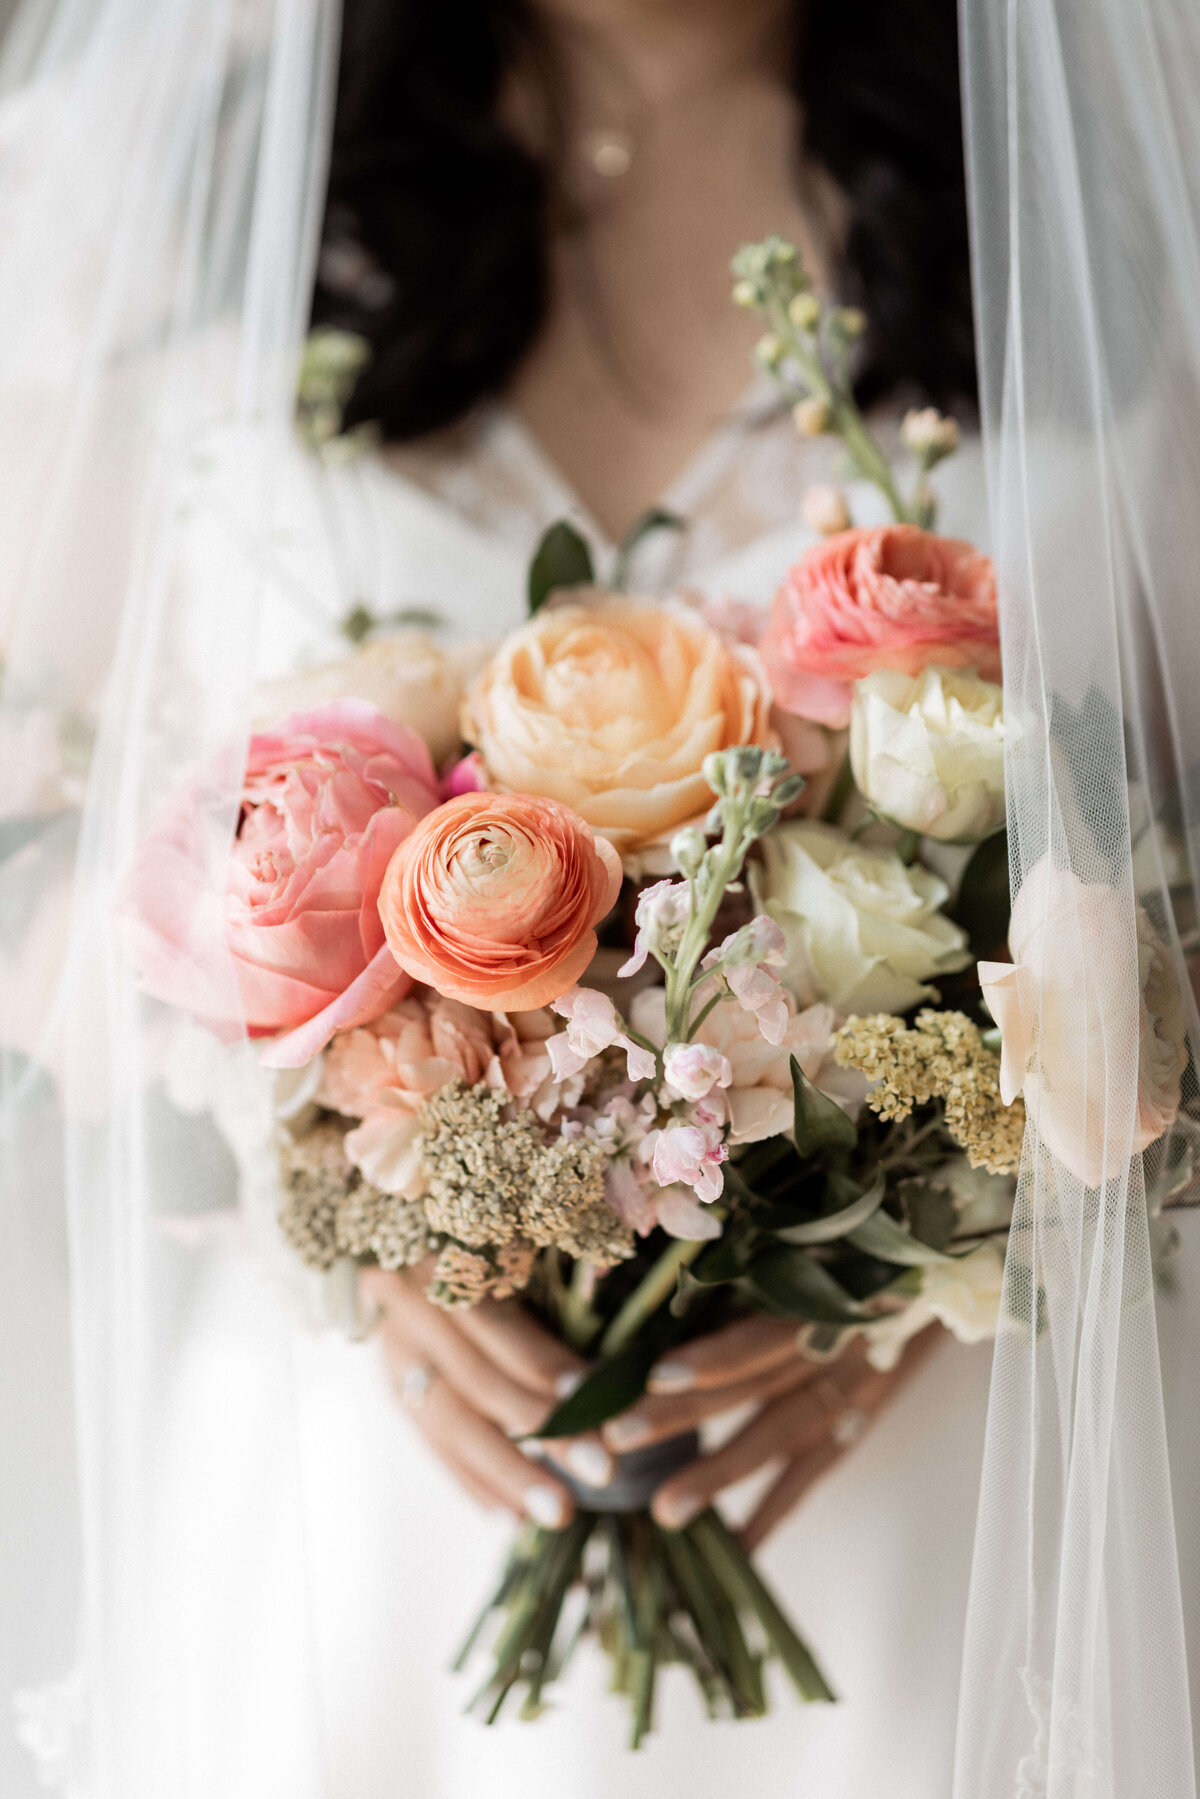 A bride in a veil holding a bouquet of garden roses, ranunculus, spray roses, stock flower and yarrow in pastel colors